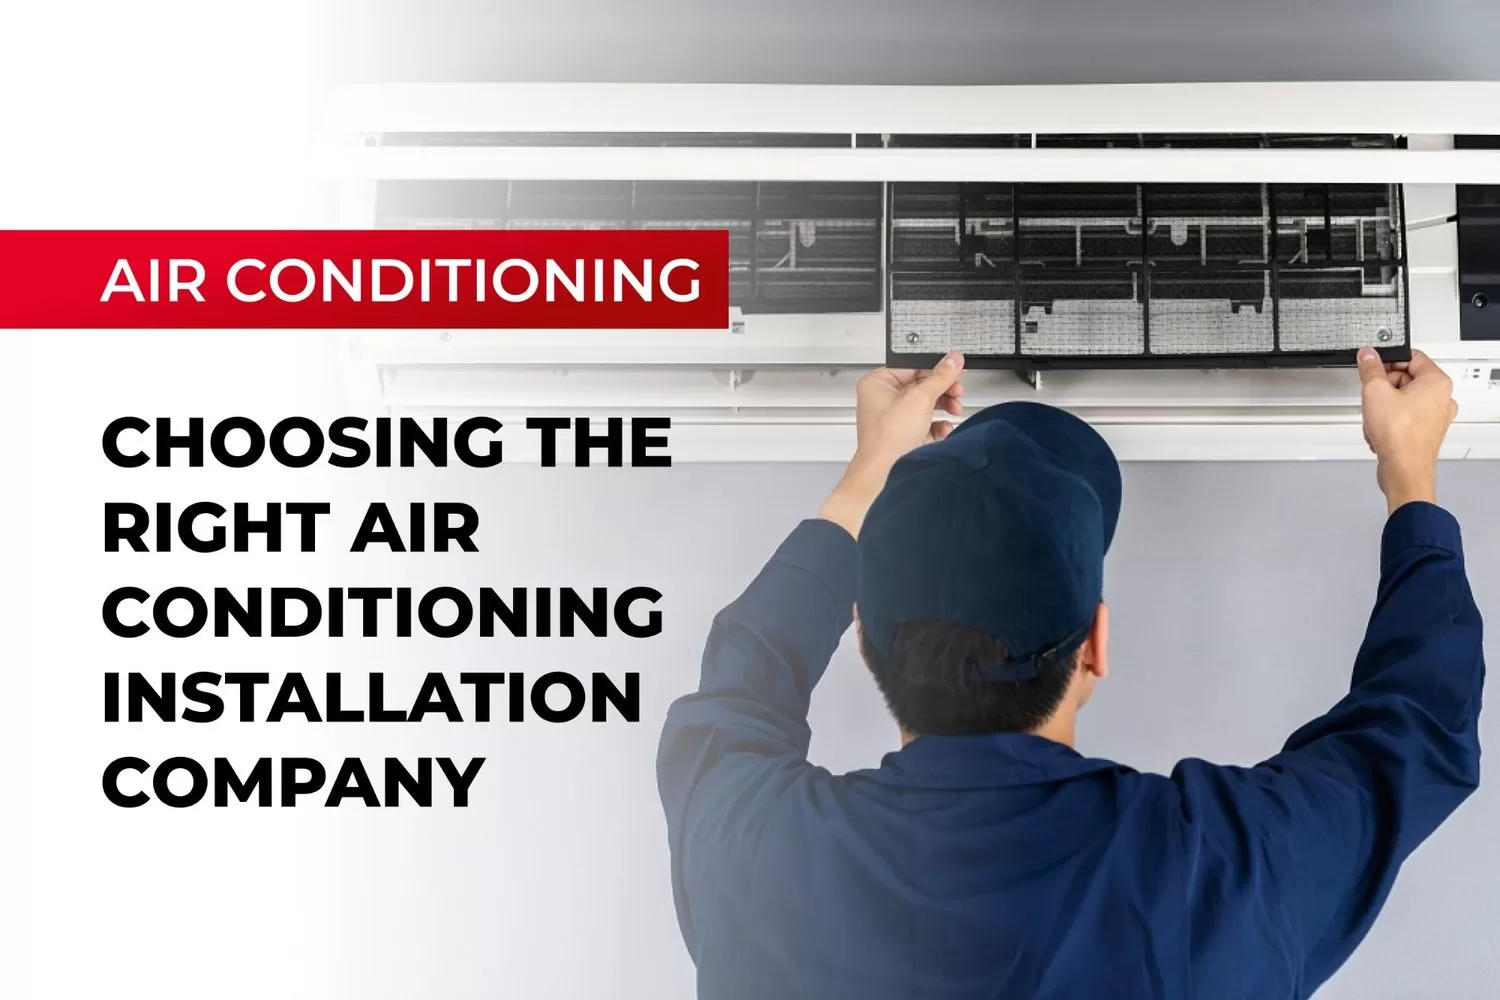 Choosing the Right Air Conditioning Installation Company